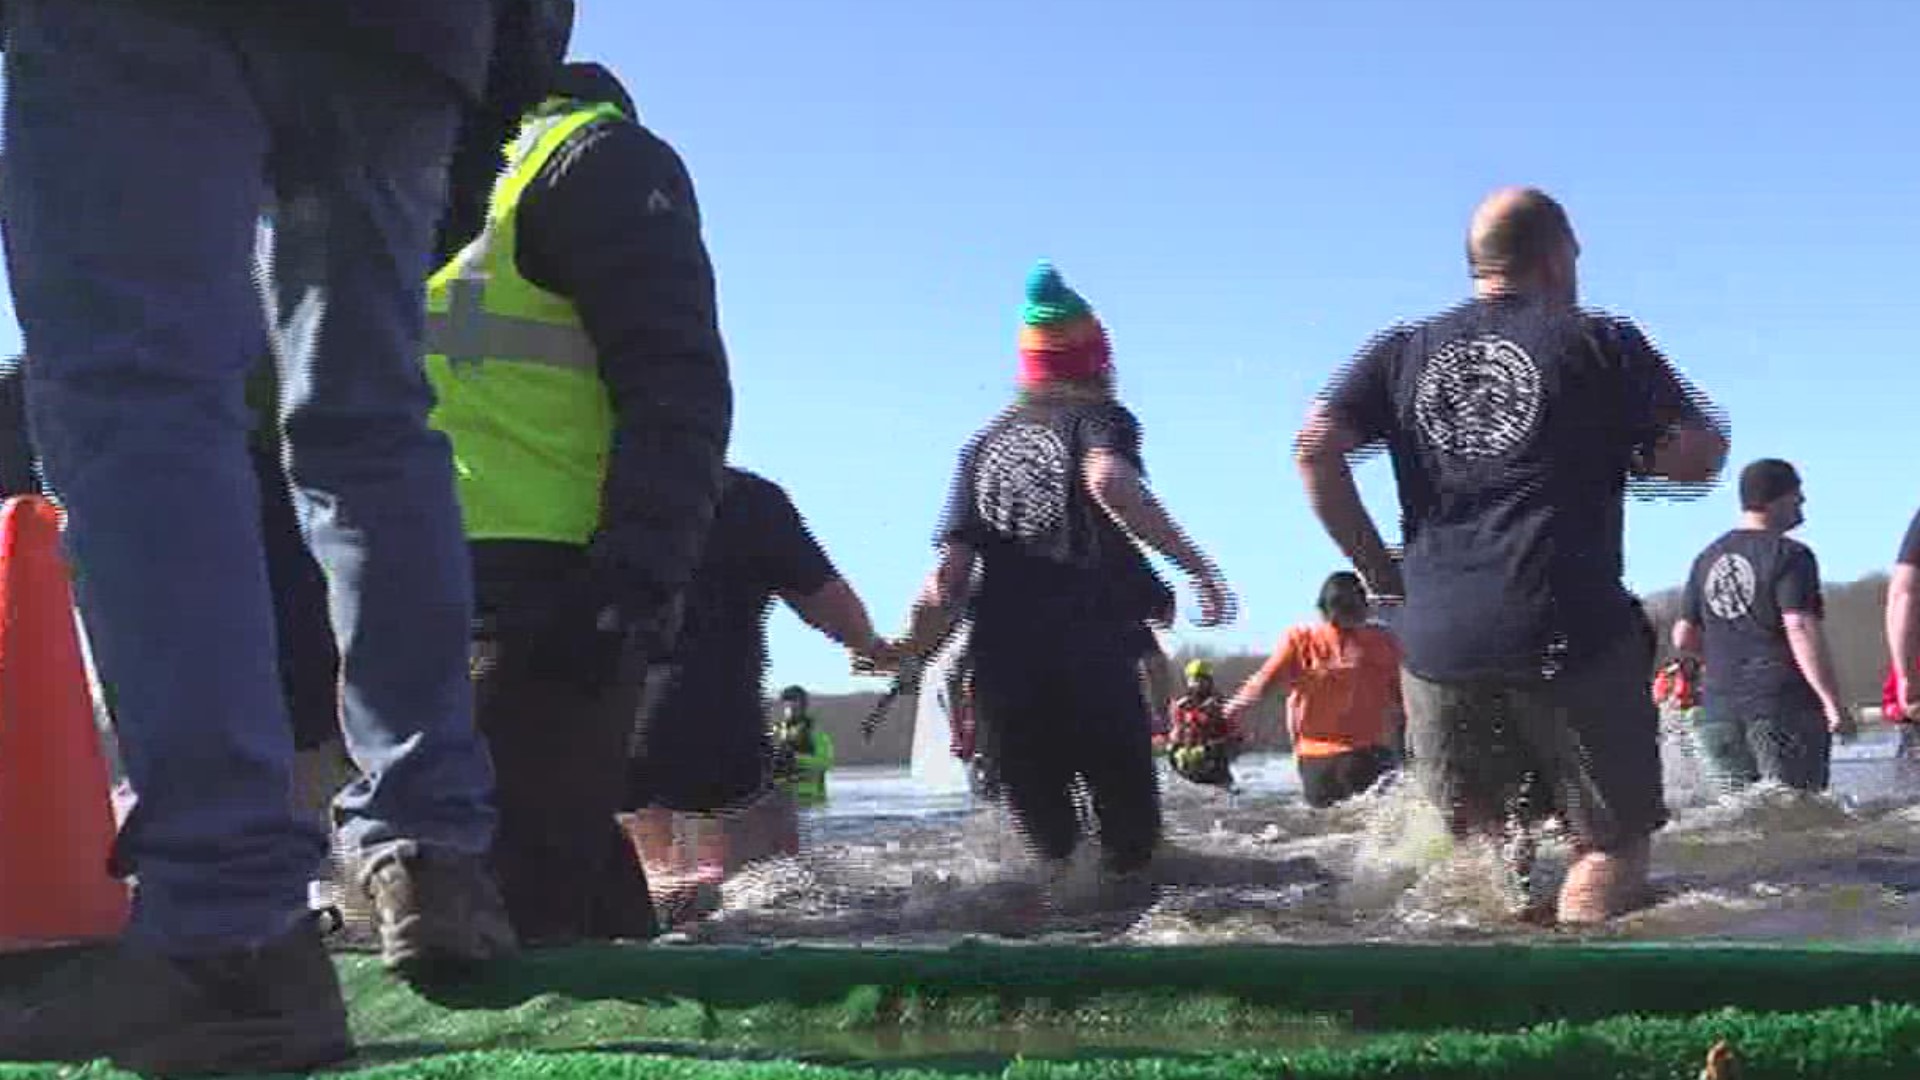 Plungers began at noon with 28-degree water, hours after volunteers used chainsaws to cut through 3 inches of ice to make space for the event.